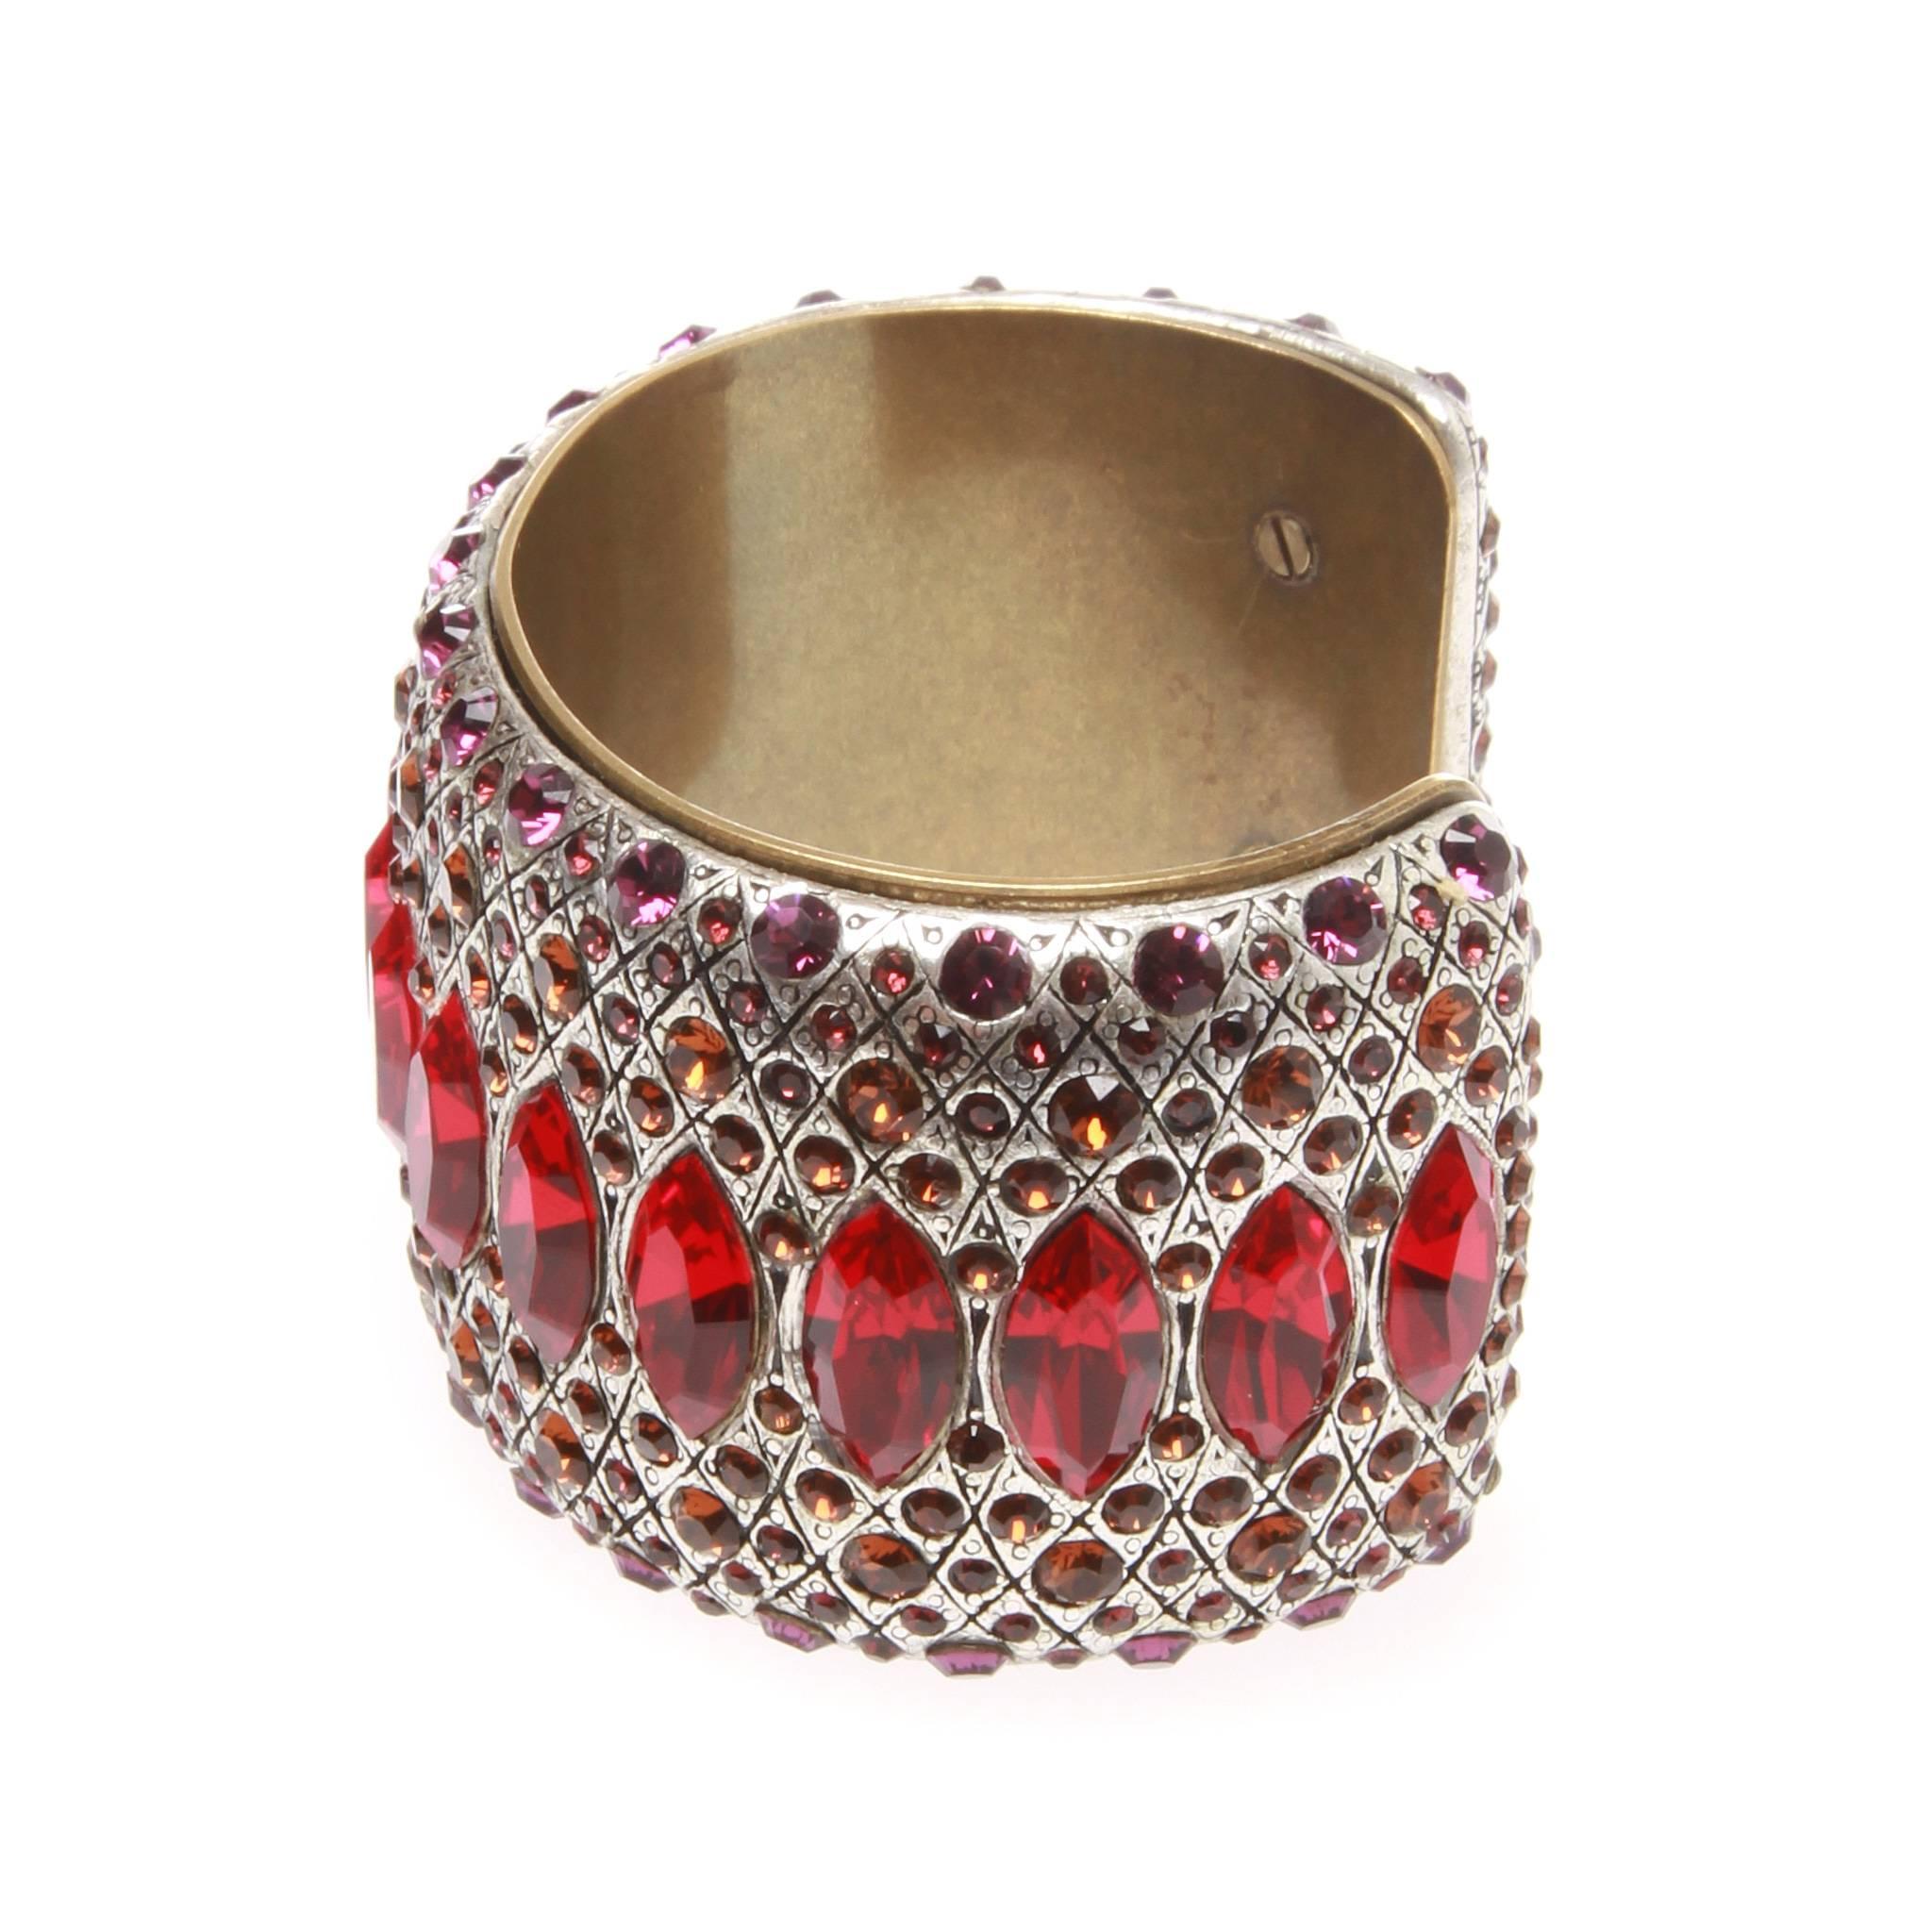 Lanvin cuff embellished with red, apricot orange and magenta Swarovski crystals set in an aged silver and brass-finish support. Crafted in an open cuff style the cuff is fully encrusted with crystals and is a highly sought after piece of Lanvin